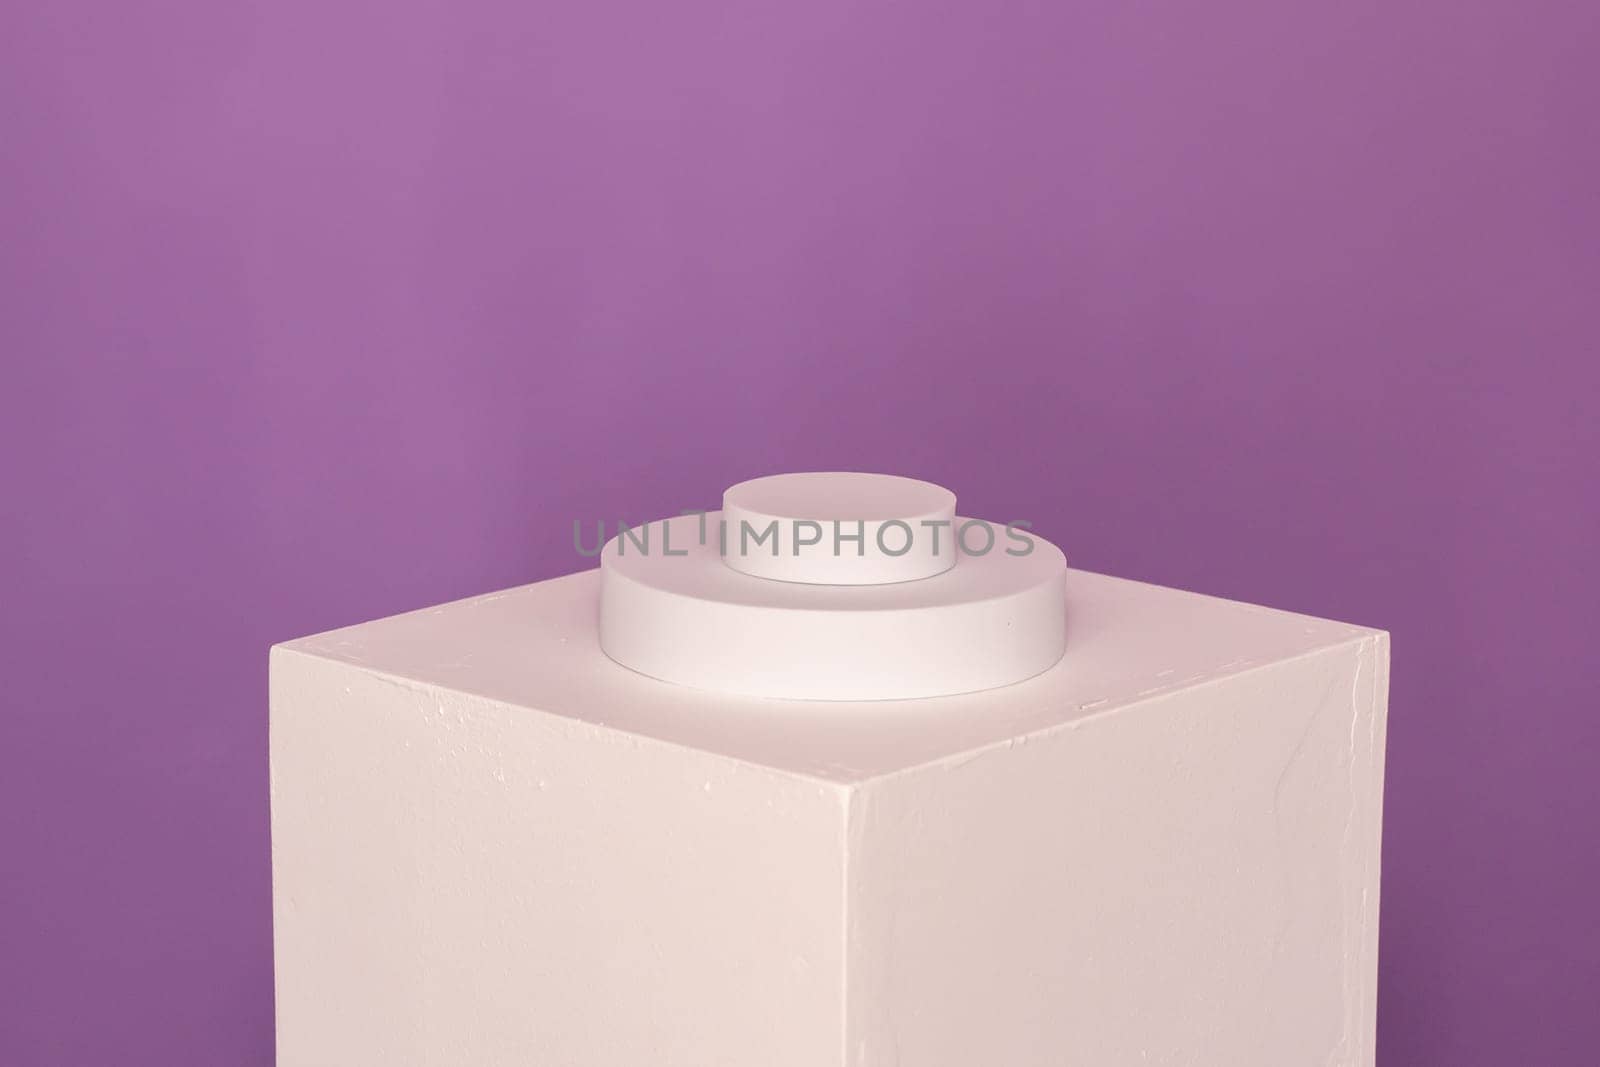 Pedestals product photography mockup by PaulCarr